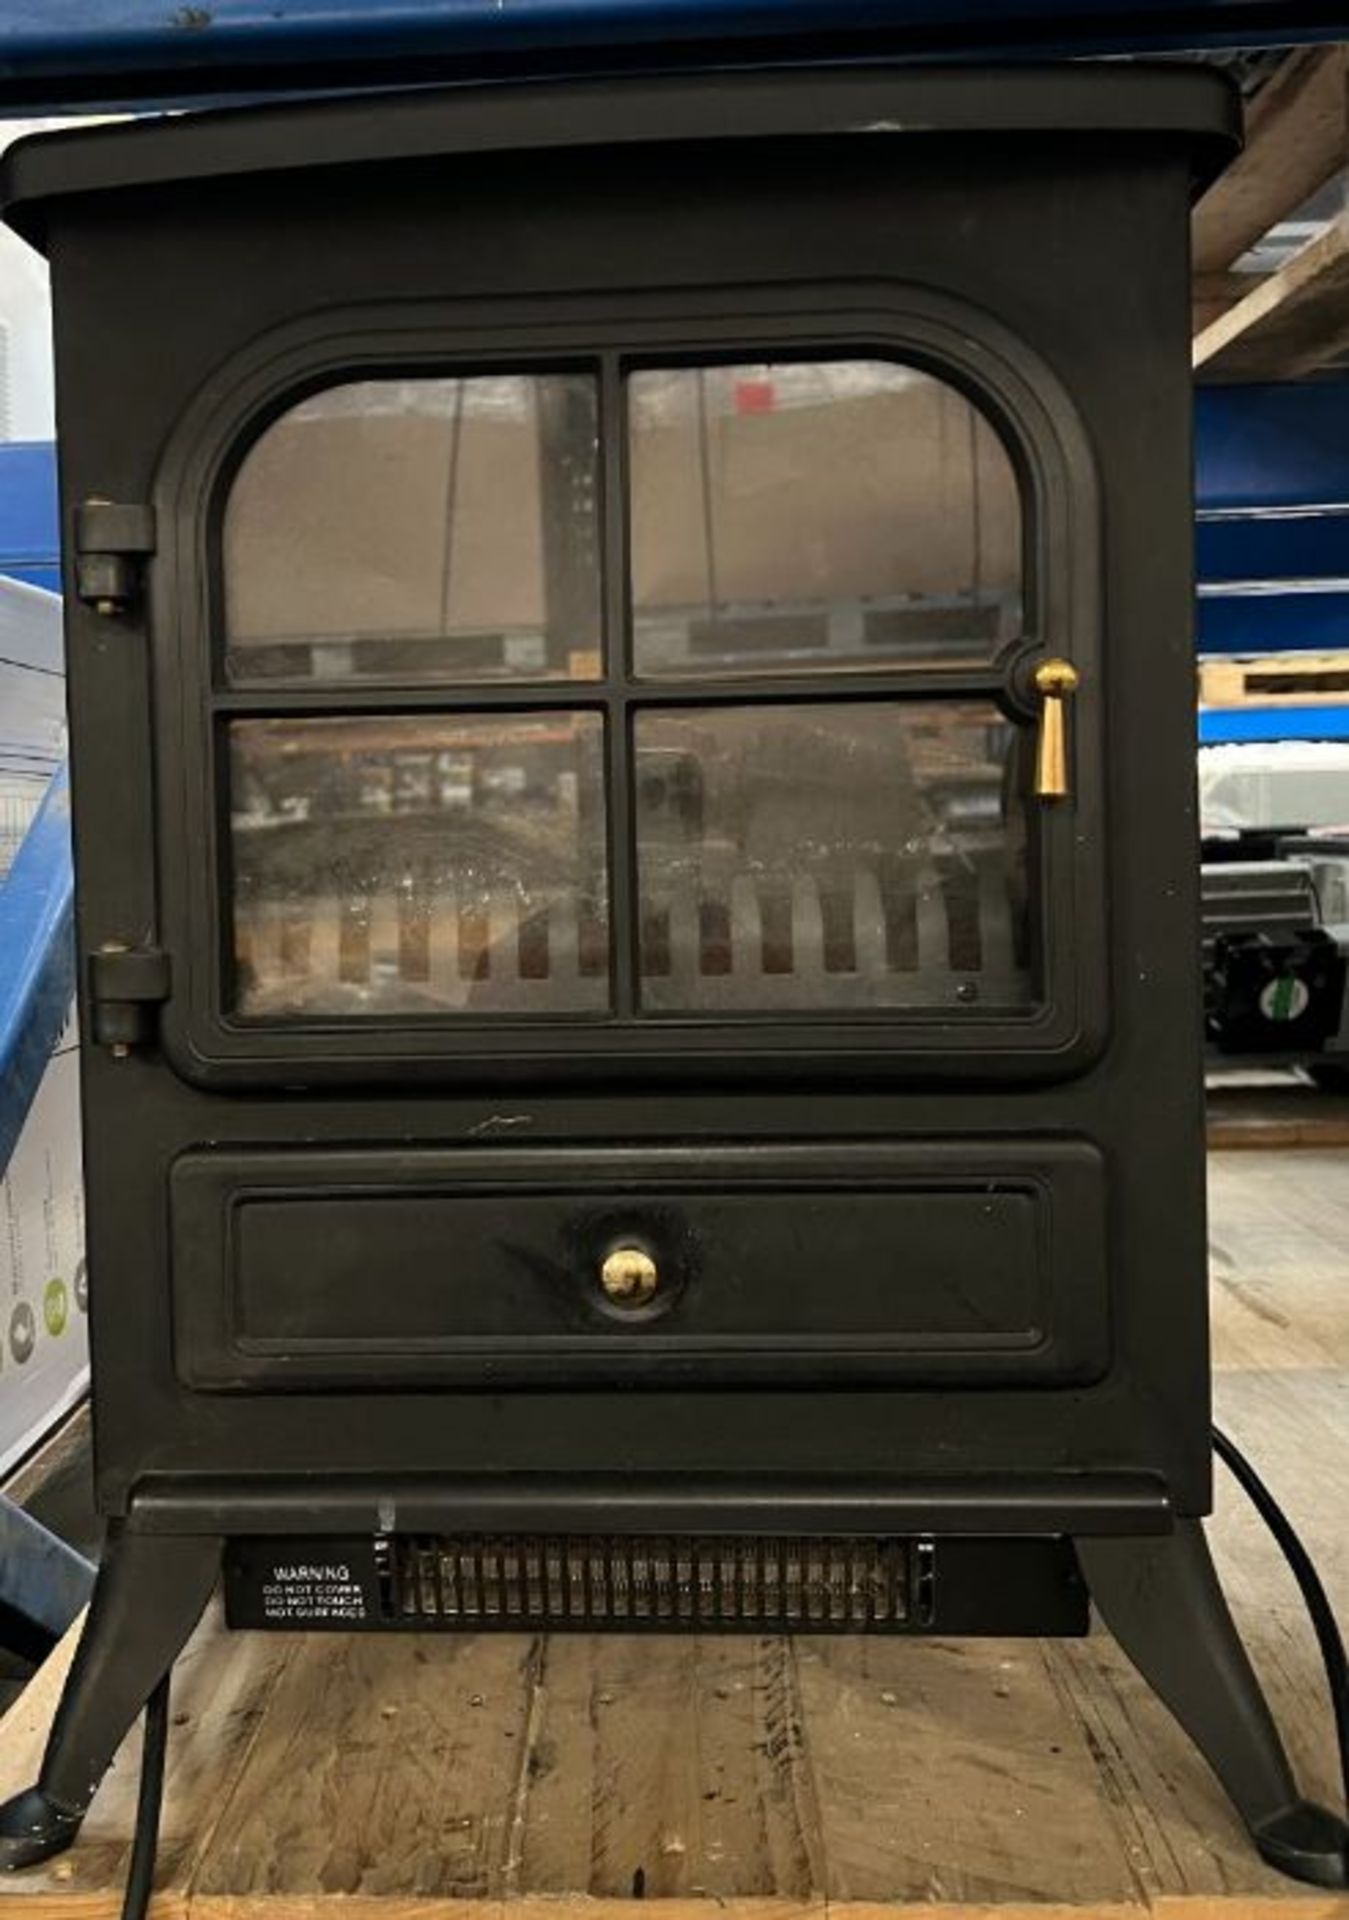 1 X ELECTRIC STOVE / UNTESTED CUSTOMER RETURNS